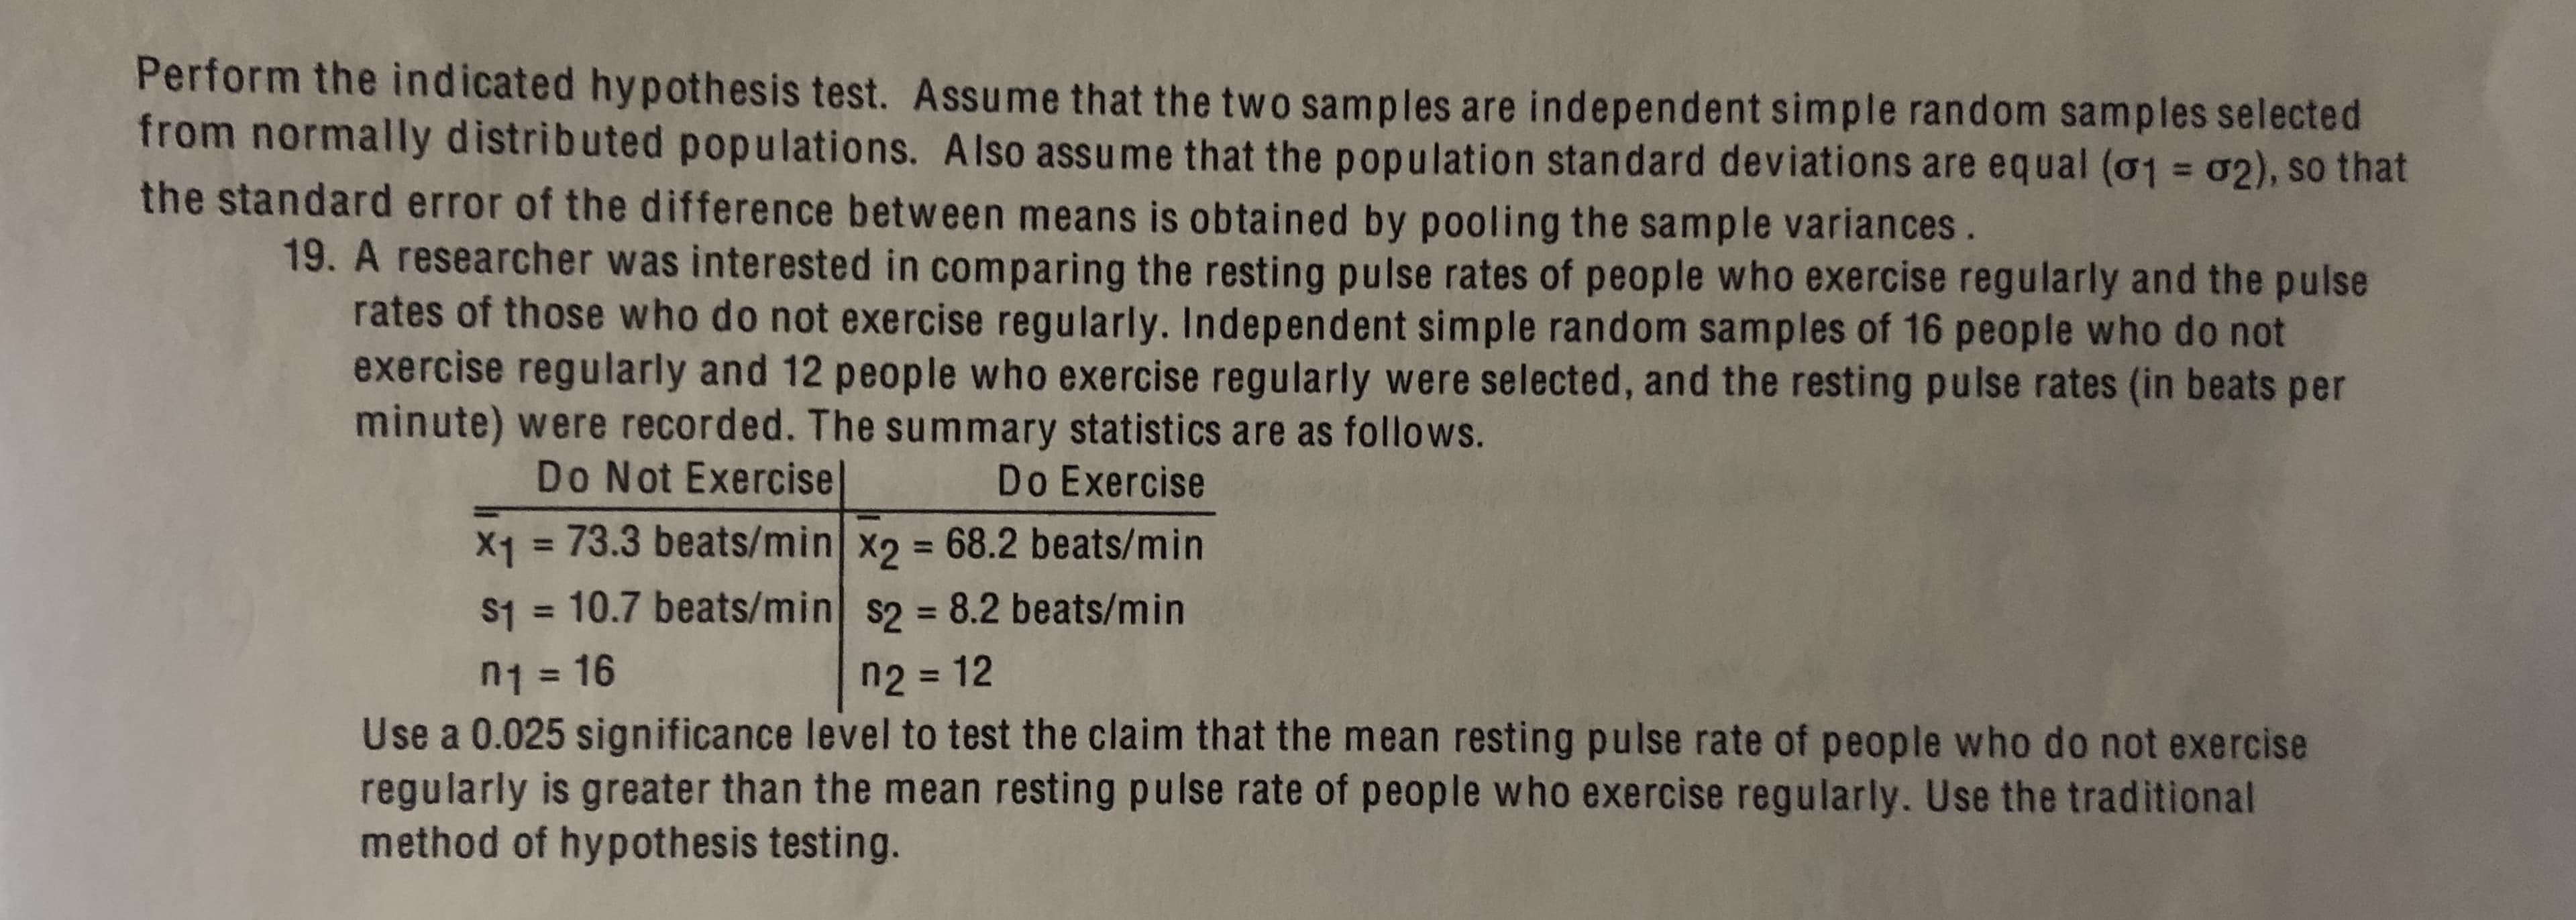 Perform the indicated hypothesis test. Assume that the two samples are independent simple random samples selected
from normally distributed populations. Also assume that the population standard deviations are equal (o1 = 02), so that
%3D
the standard error of the difference between means is obtained by pooling the sample variances.
19. A researcher was interested in comparing the resting pulse rates of people who exercise regularly and the pulse
rates of those who do not exercise regularly. Independent simple random samples of 16 people who do not
exercise regularly and 12 people who exercise regularly were selected, and the resting pulse rates (in beats per
minute) were recorded. The summary statistics are as follows.
Do Not Exercise|
Do Exercise
X1 = 73.3 beats/min x2 68.2 beats/min
S1 = 10.7 beats/min s2 = 8.2 beats/min
%3D
%3D
n2 = 12
n1 = 16
%3D
Use a 0.025 significance level to test the claim that the mean resting pulse rate of people who do not exercise
regularly is greater than the mean resting pulse rate of people who exercise regularly. Use the traditional
method of hypothesis testing.
